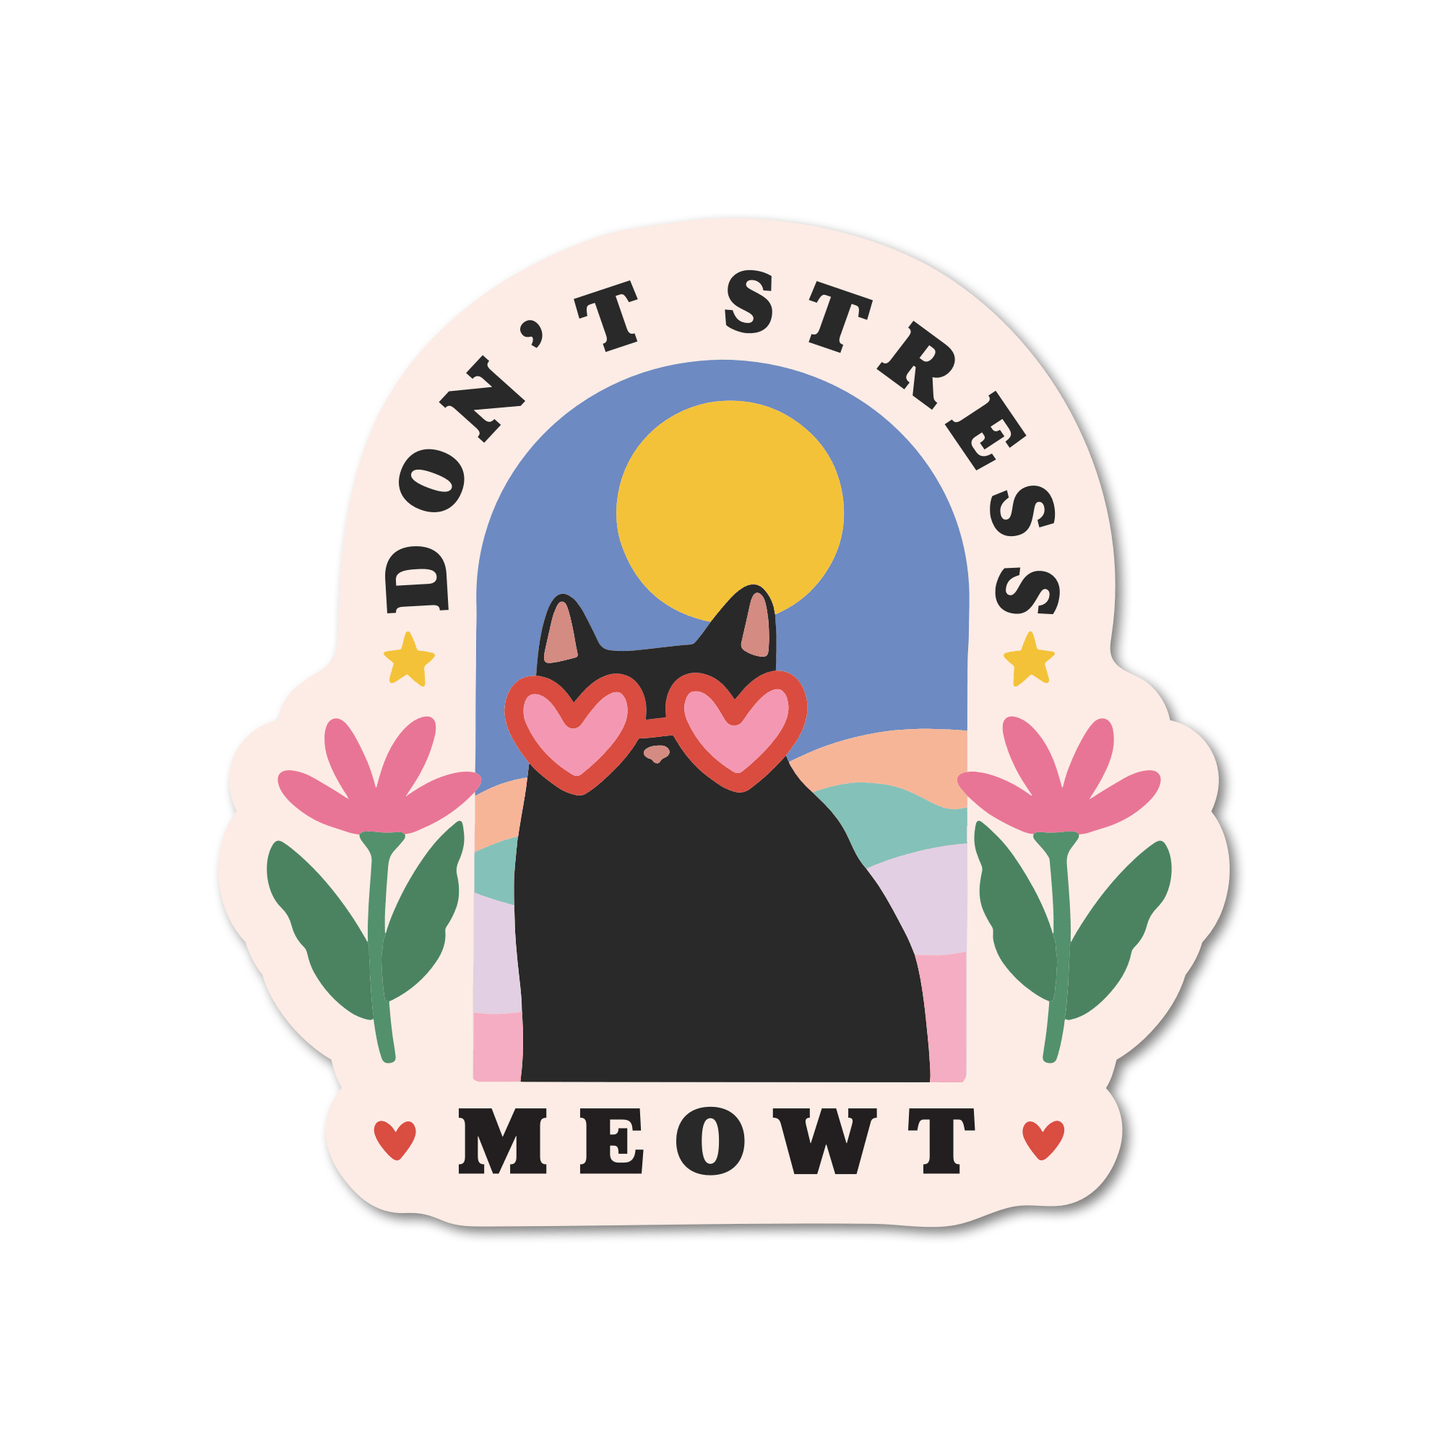 Don't Stress Meowt Cat Sticker -Mouthy Broad - The Society for Unusual Books